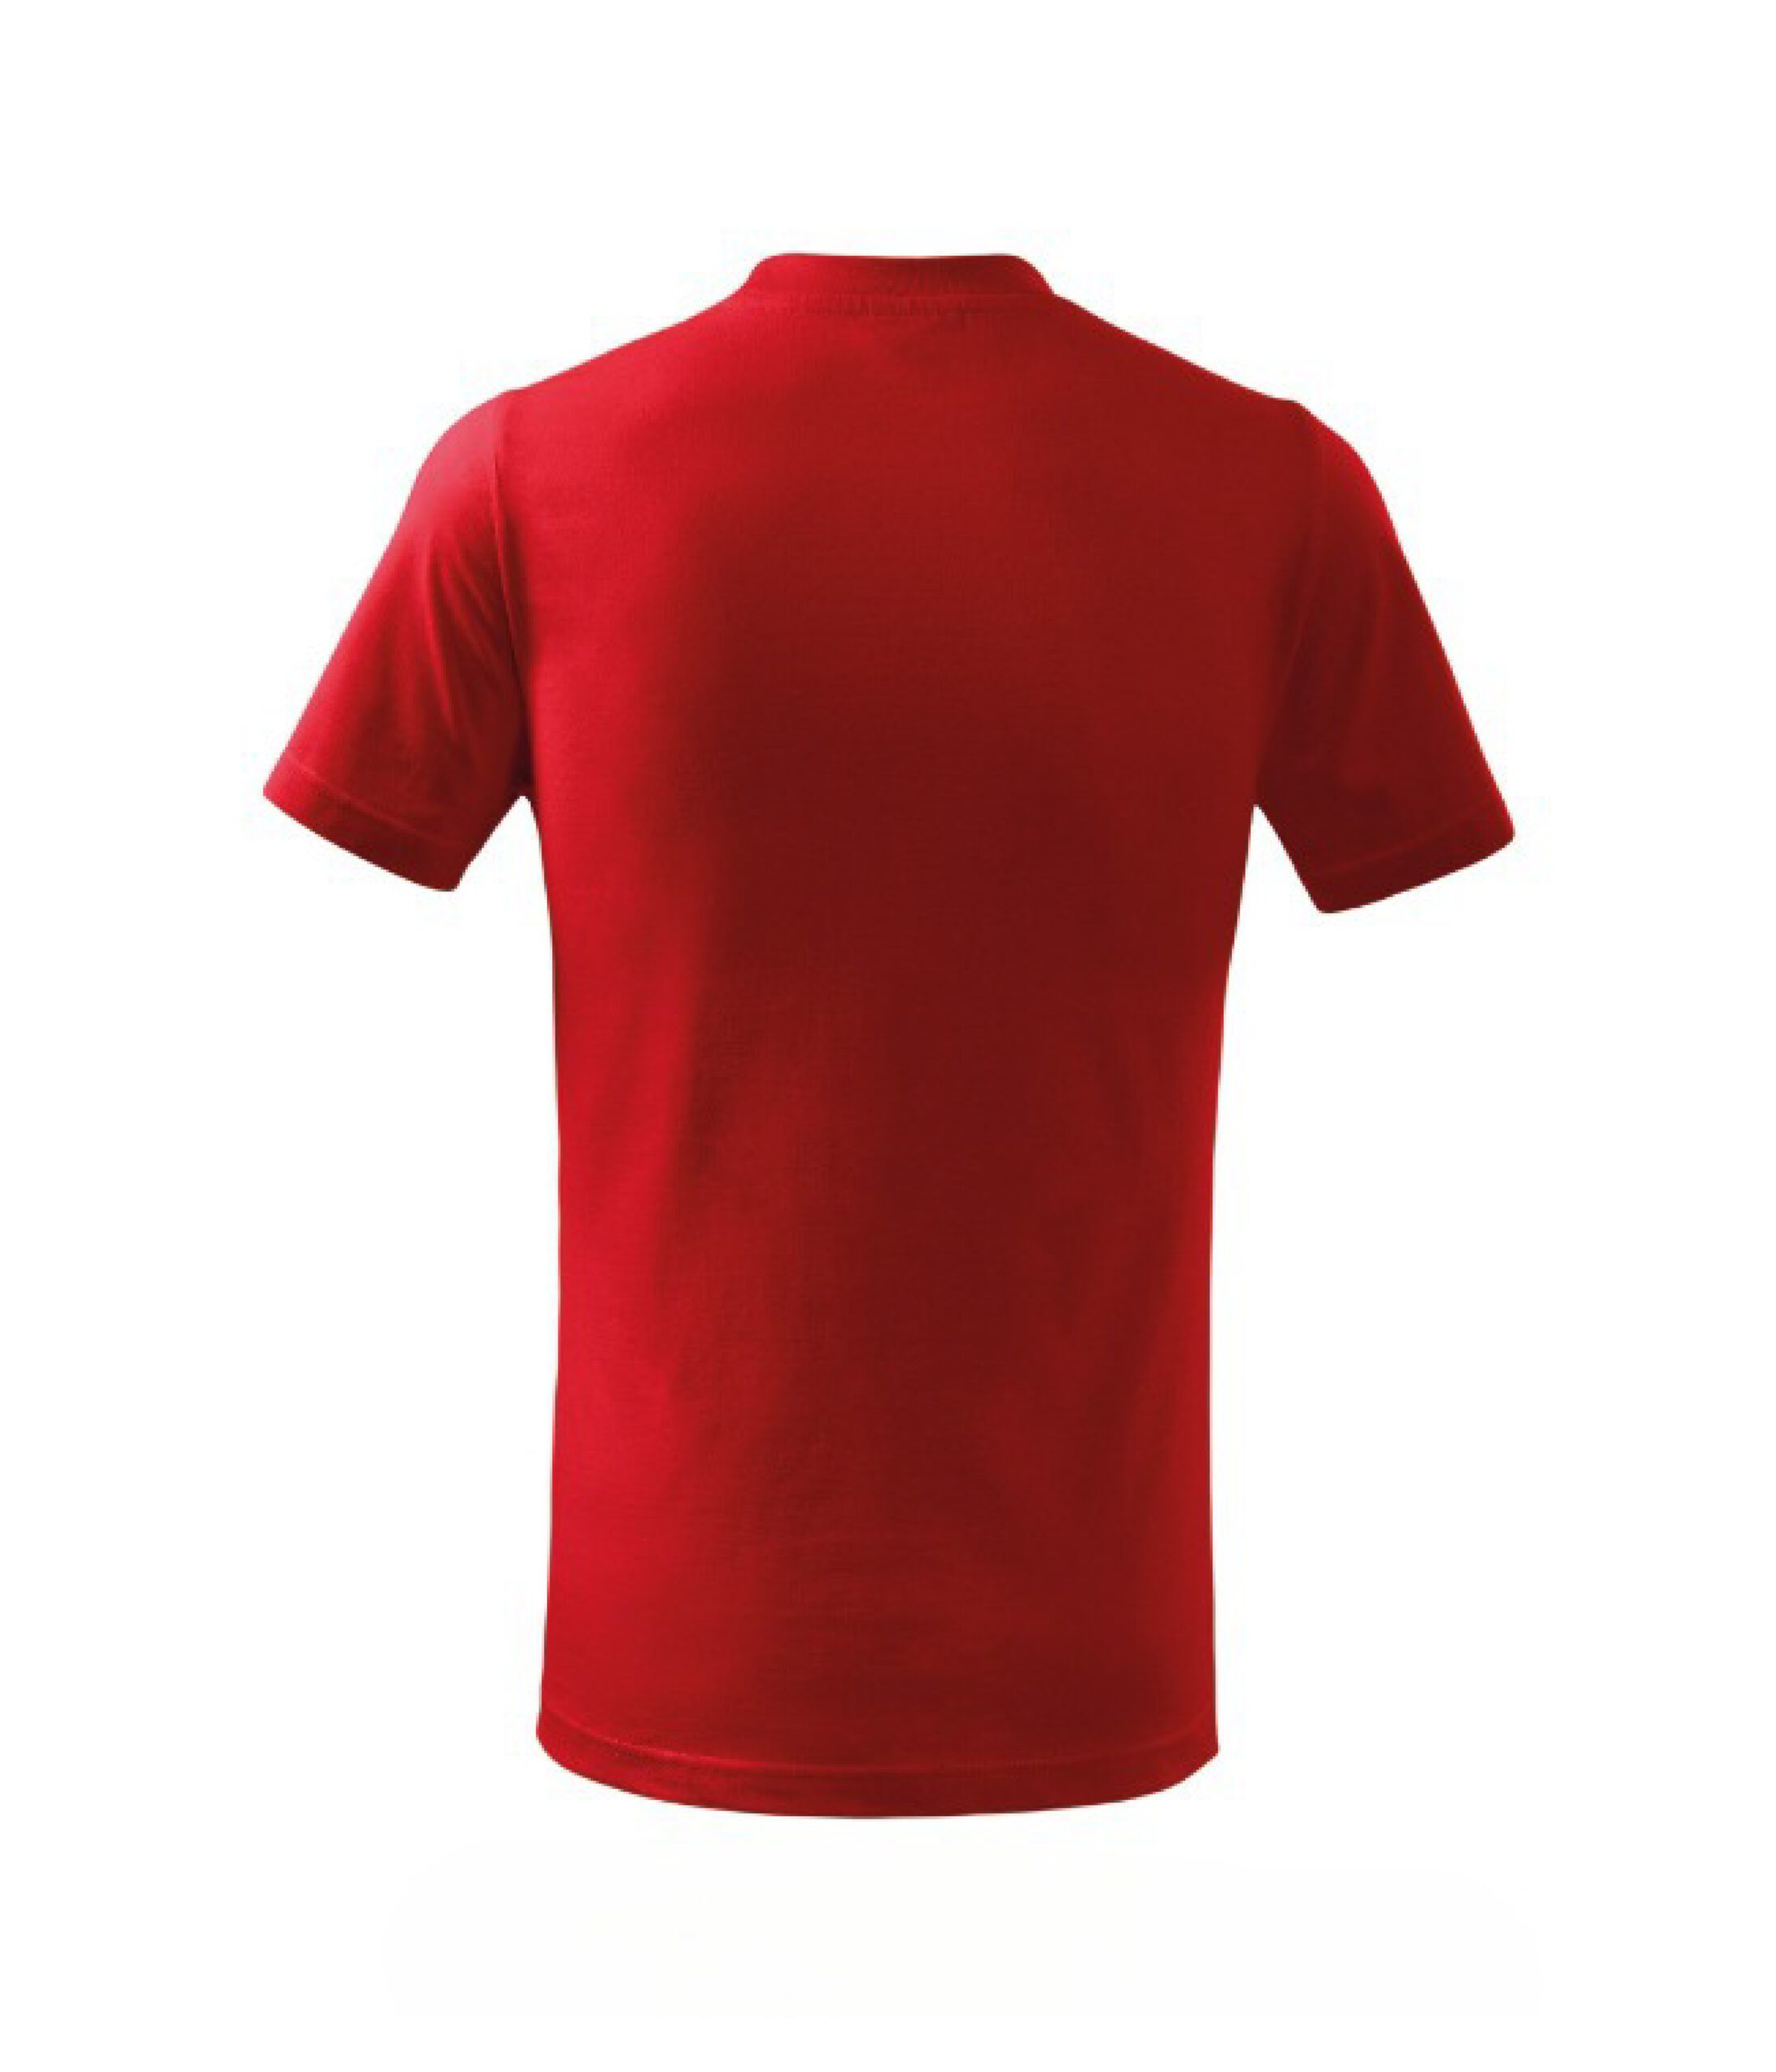 UAE NATIONAL RED COLOR TSHIRT FOR ADULT UNISEX